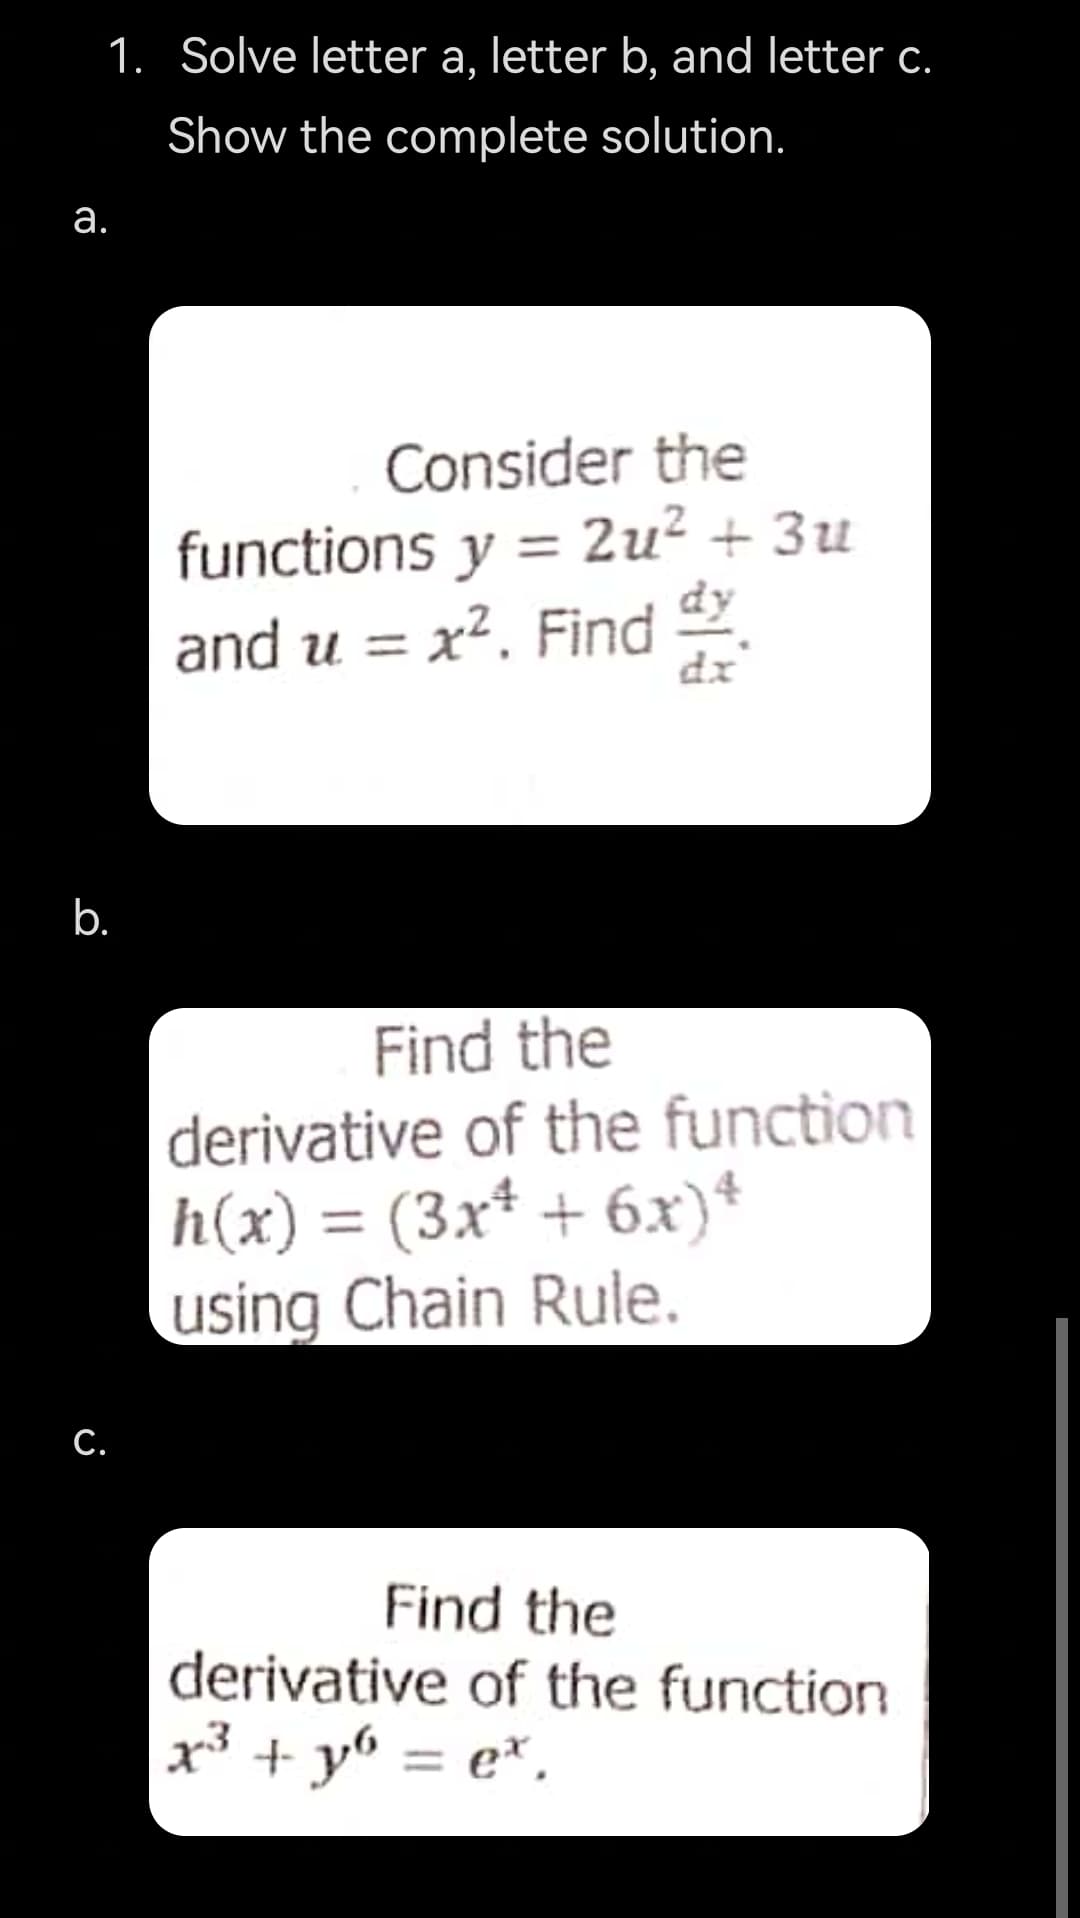 1. Solve letter a, letter b, and letter c.
Show the complete solution.
а.
Consider the
functions y = 2u² + 3u
and u = x². Find
dx
b.
Find the
derivative of the function
h(x) = (3x* + 6x)*
using Chain Rule.
С.
Find the
derivative of the function
x³ + y6 = e*,
